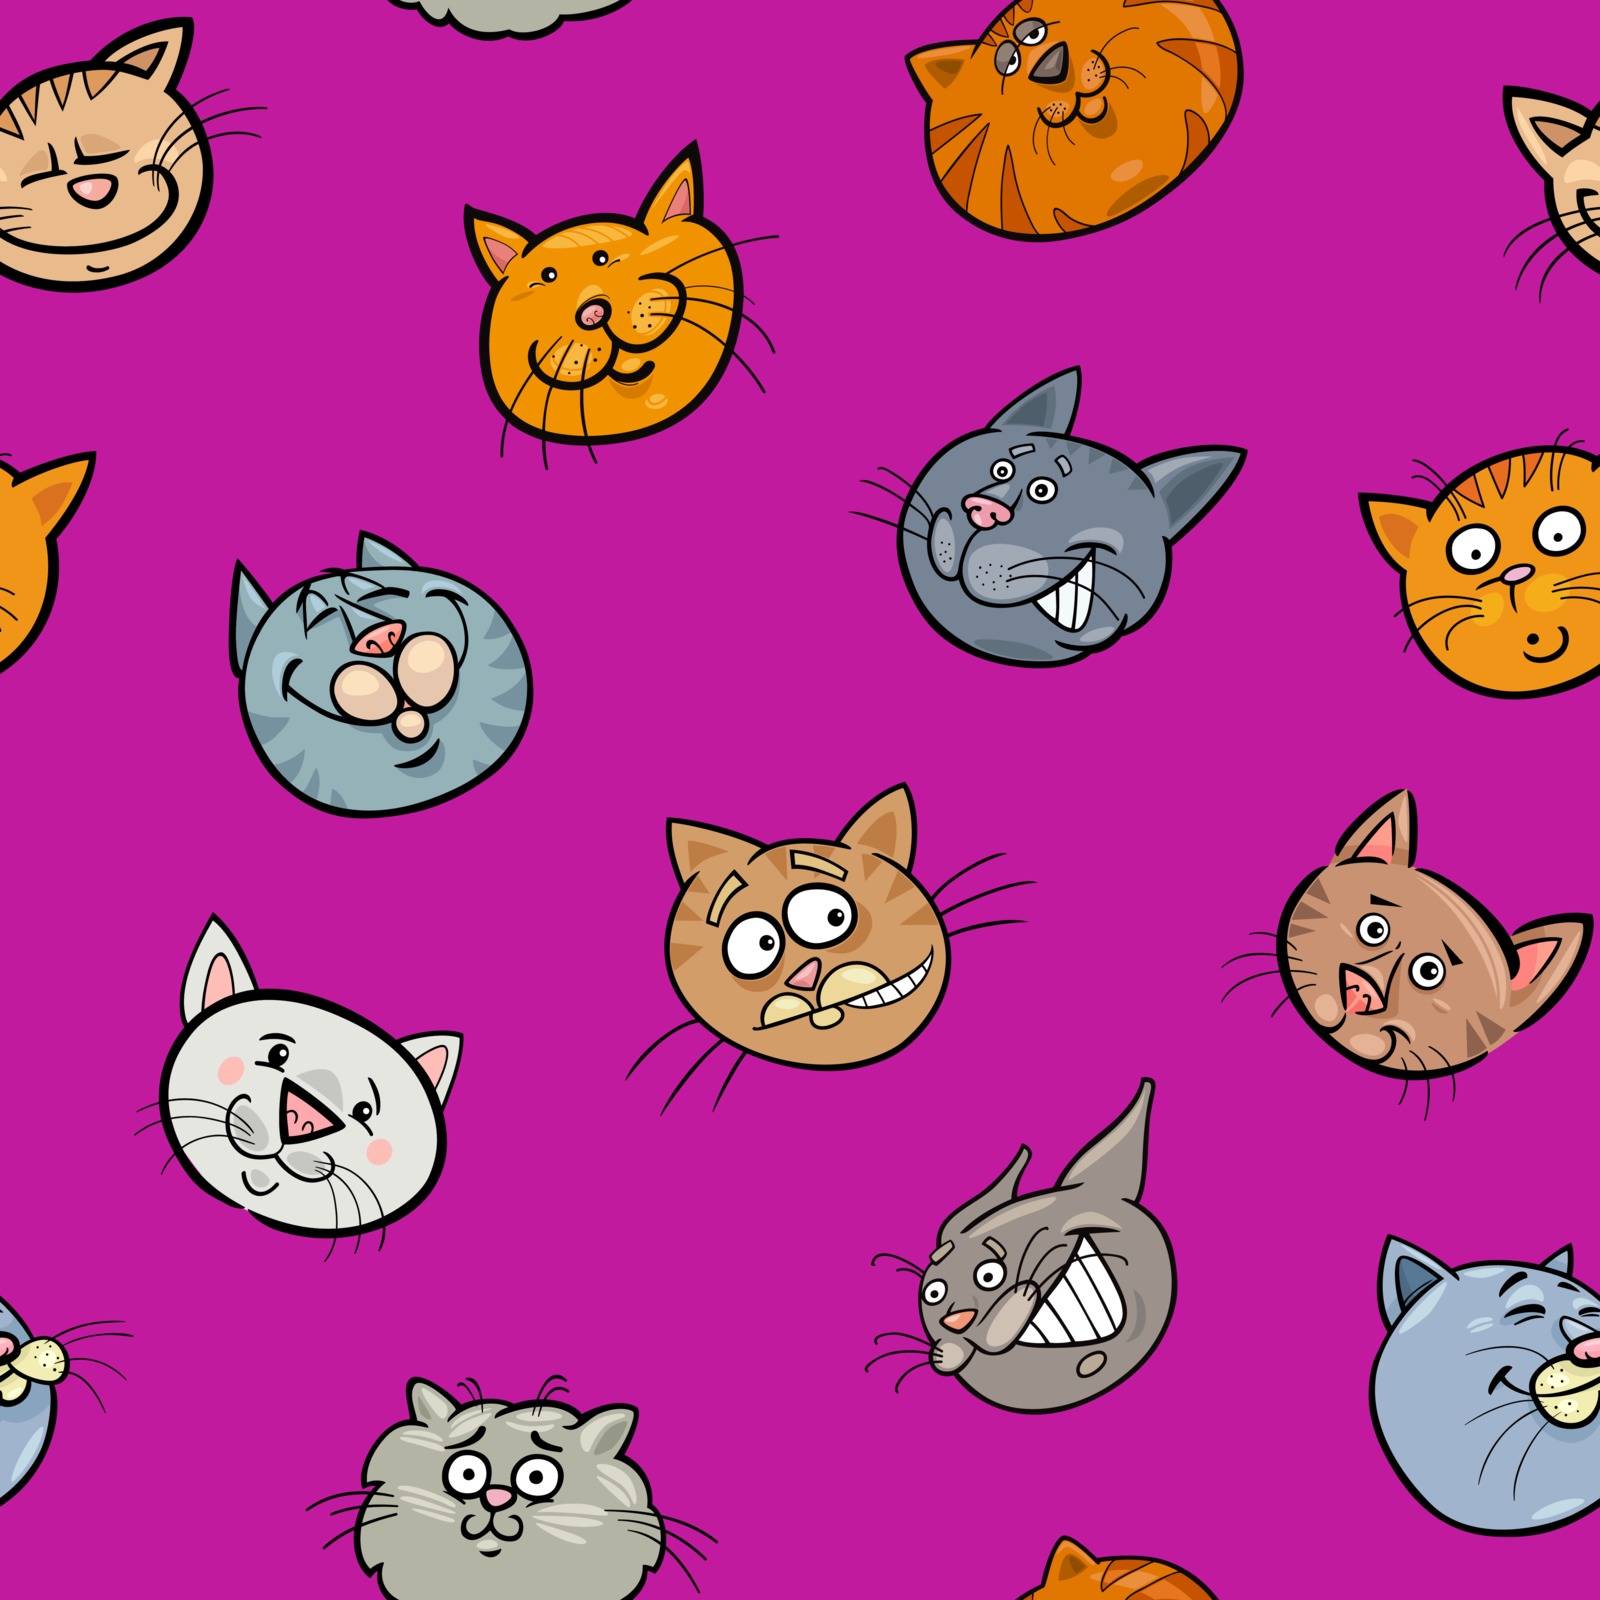 Cartoon Illustration of Cat Characters Wallpaper or Wrapping Paper Design